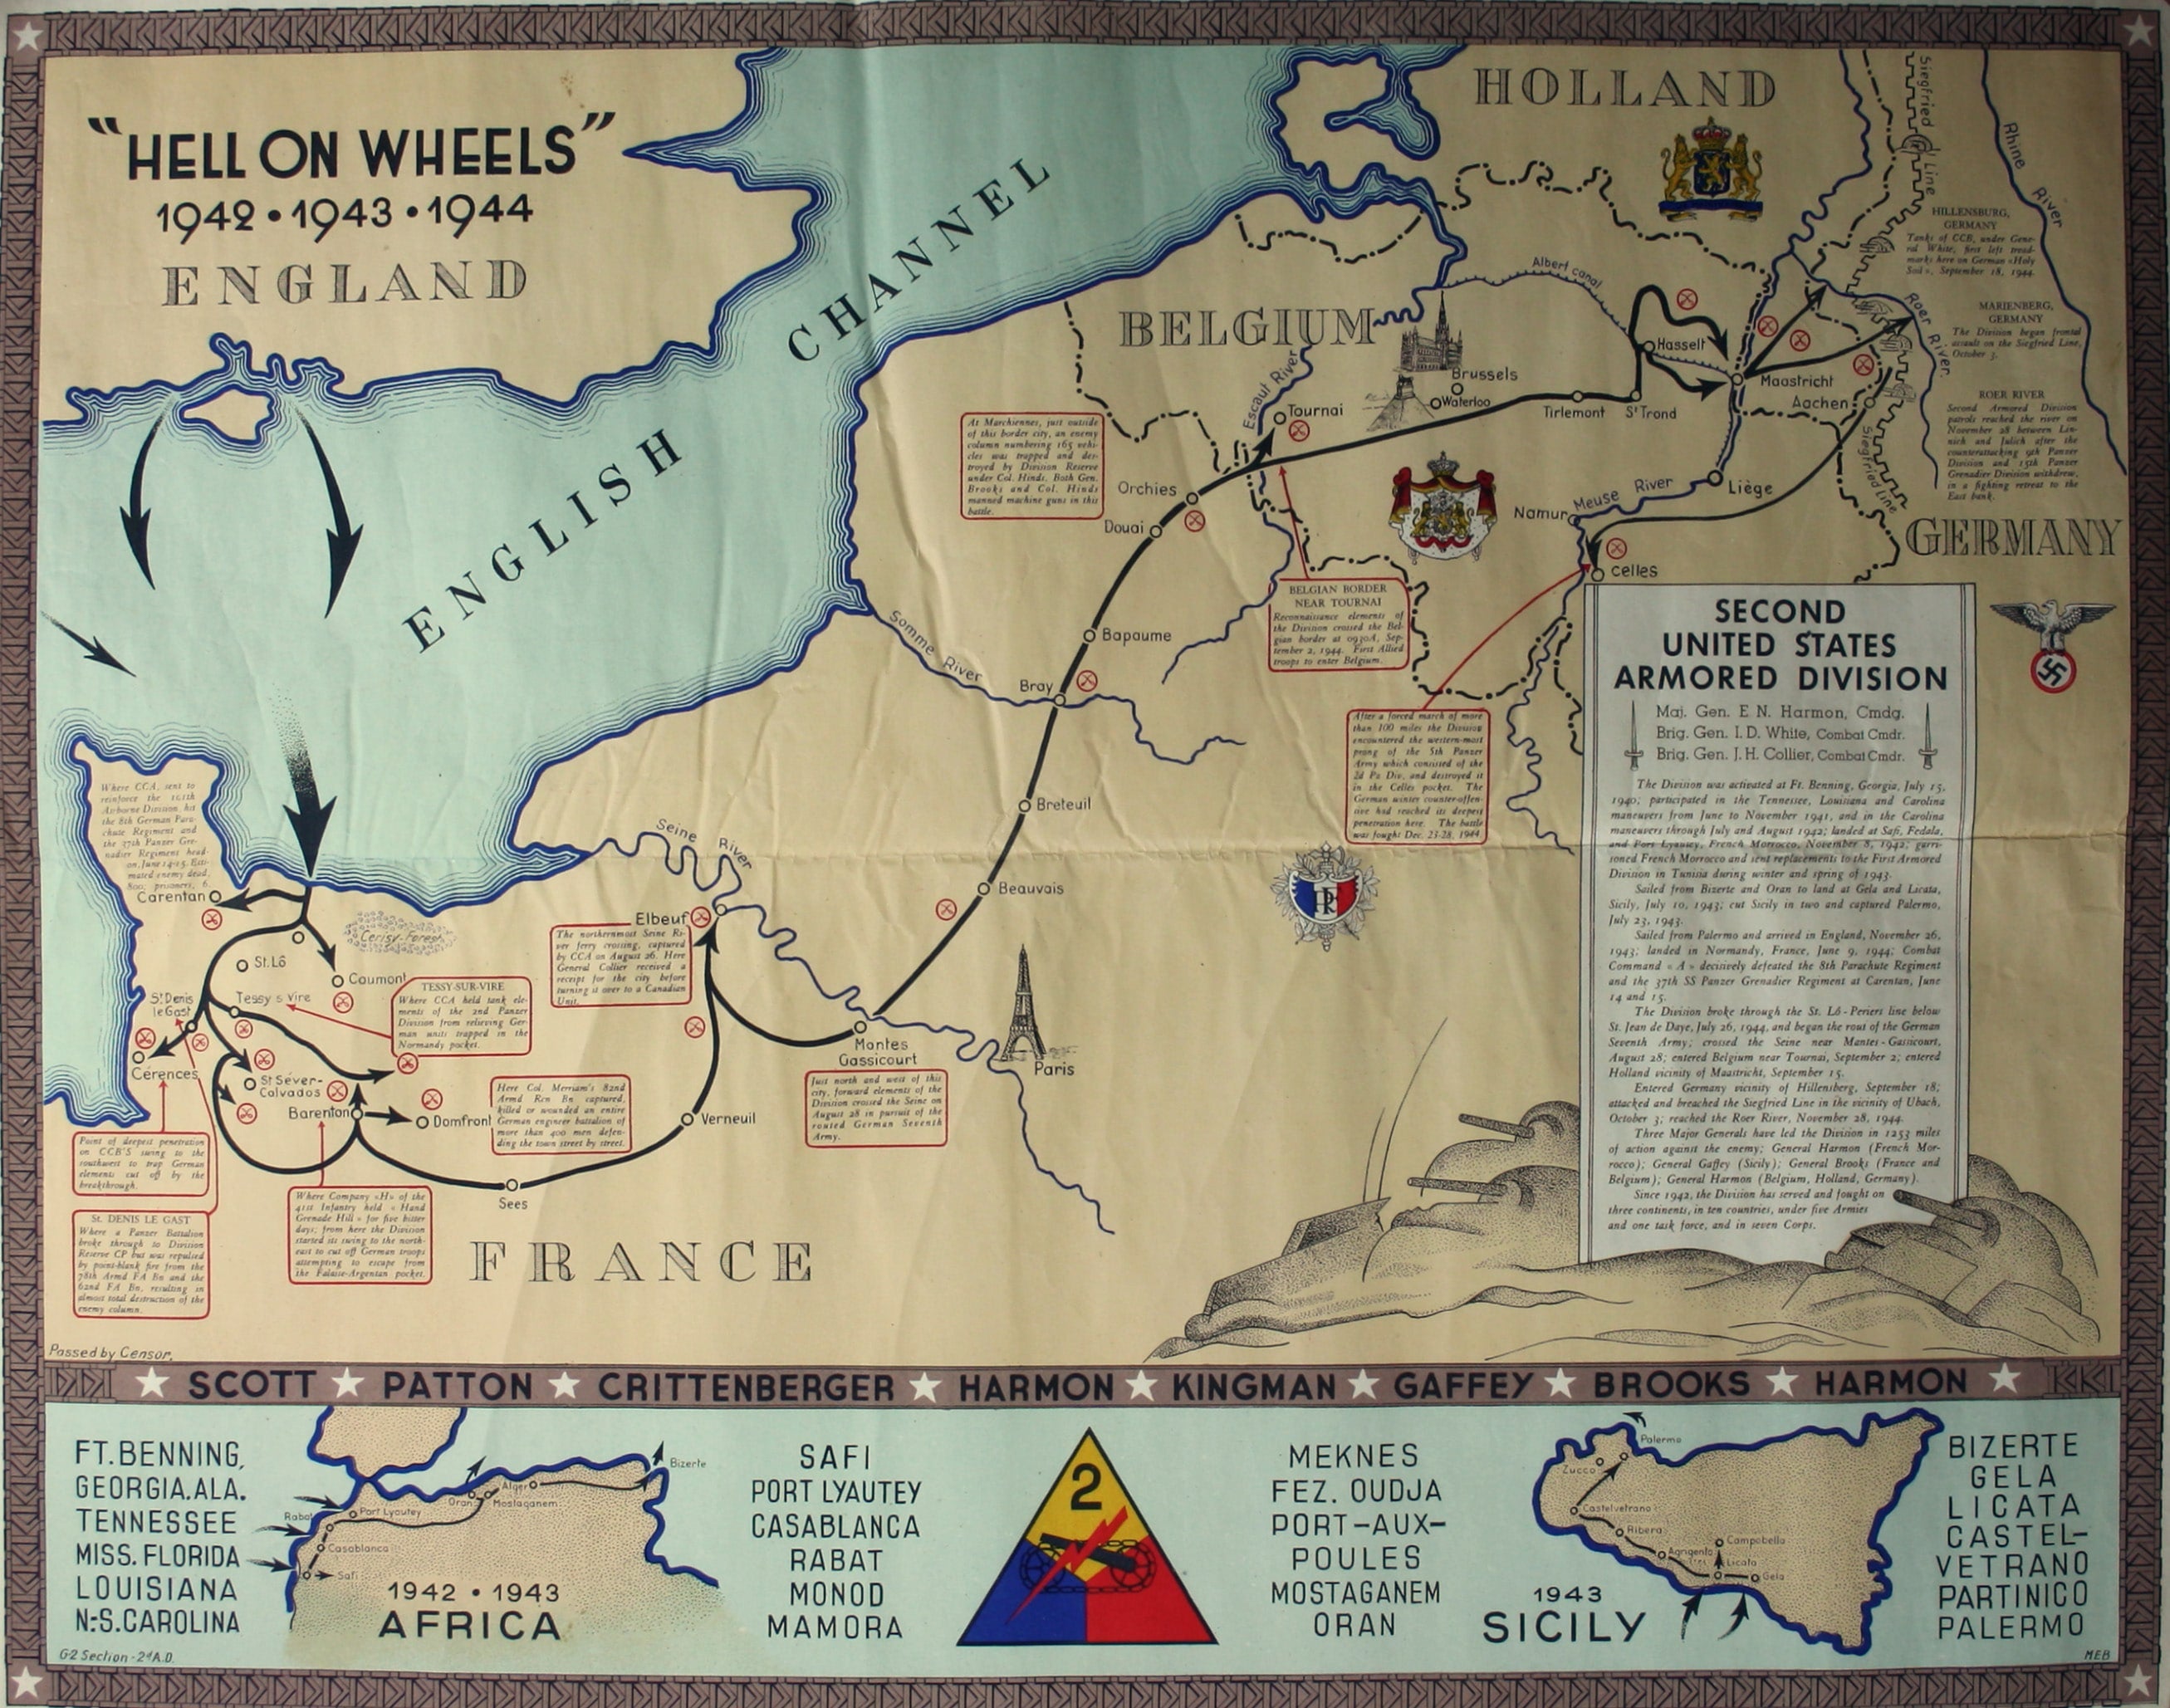 Hell on Wheels: US 2nd Armored Division Campaign Map [1st version]